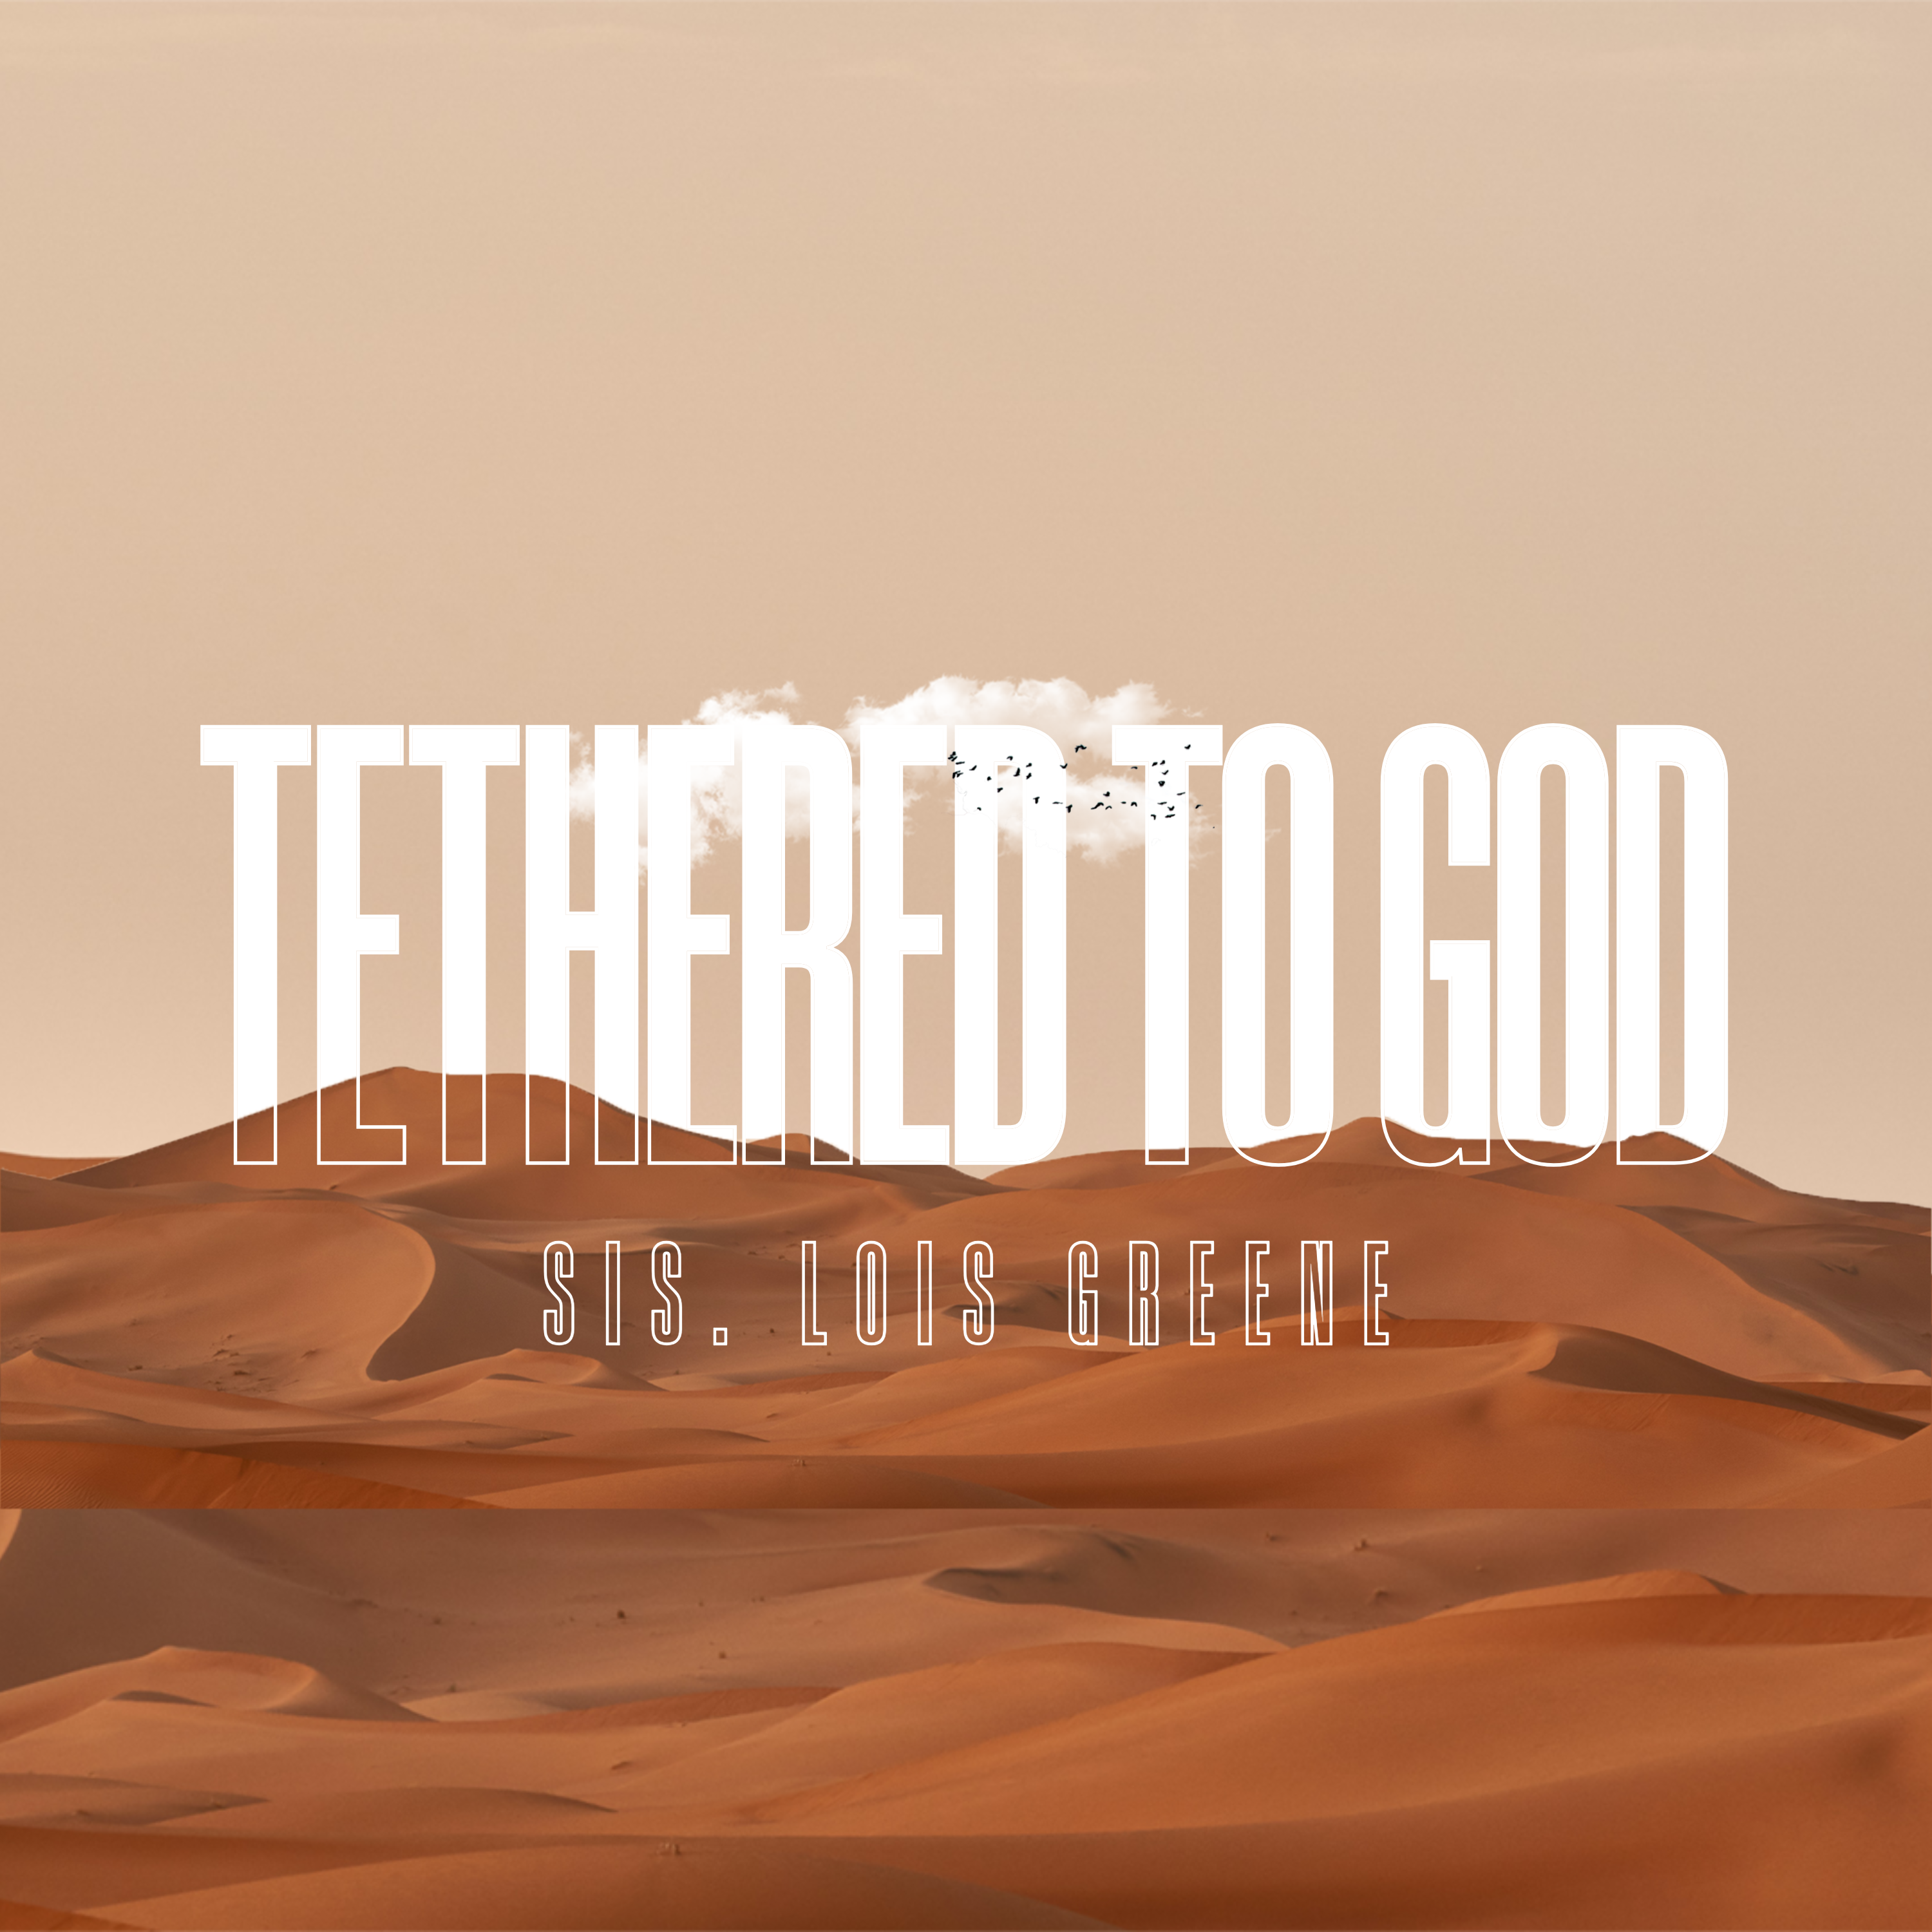 Tethered to God